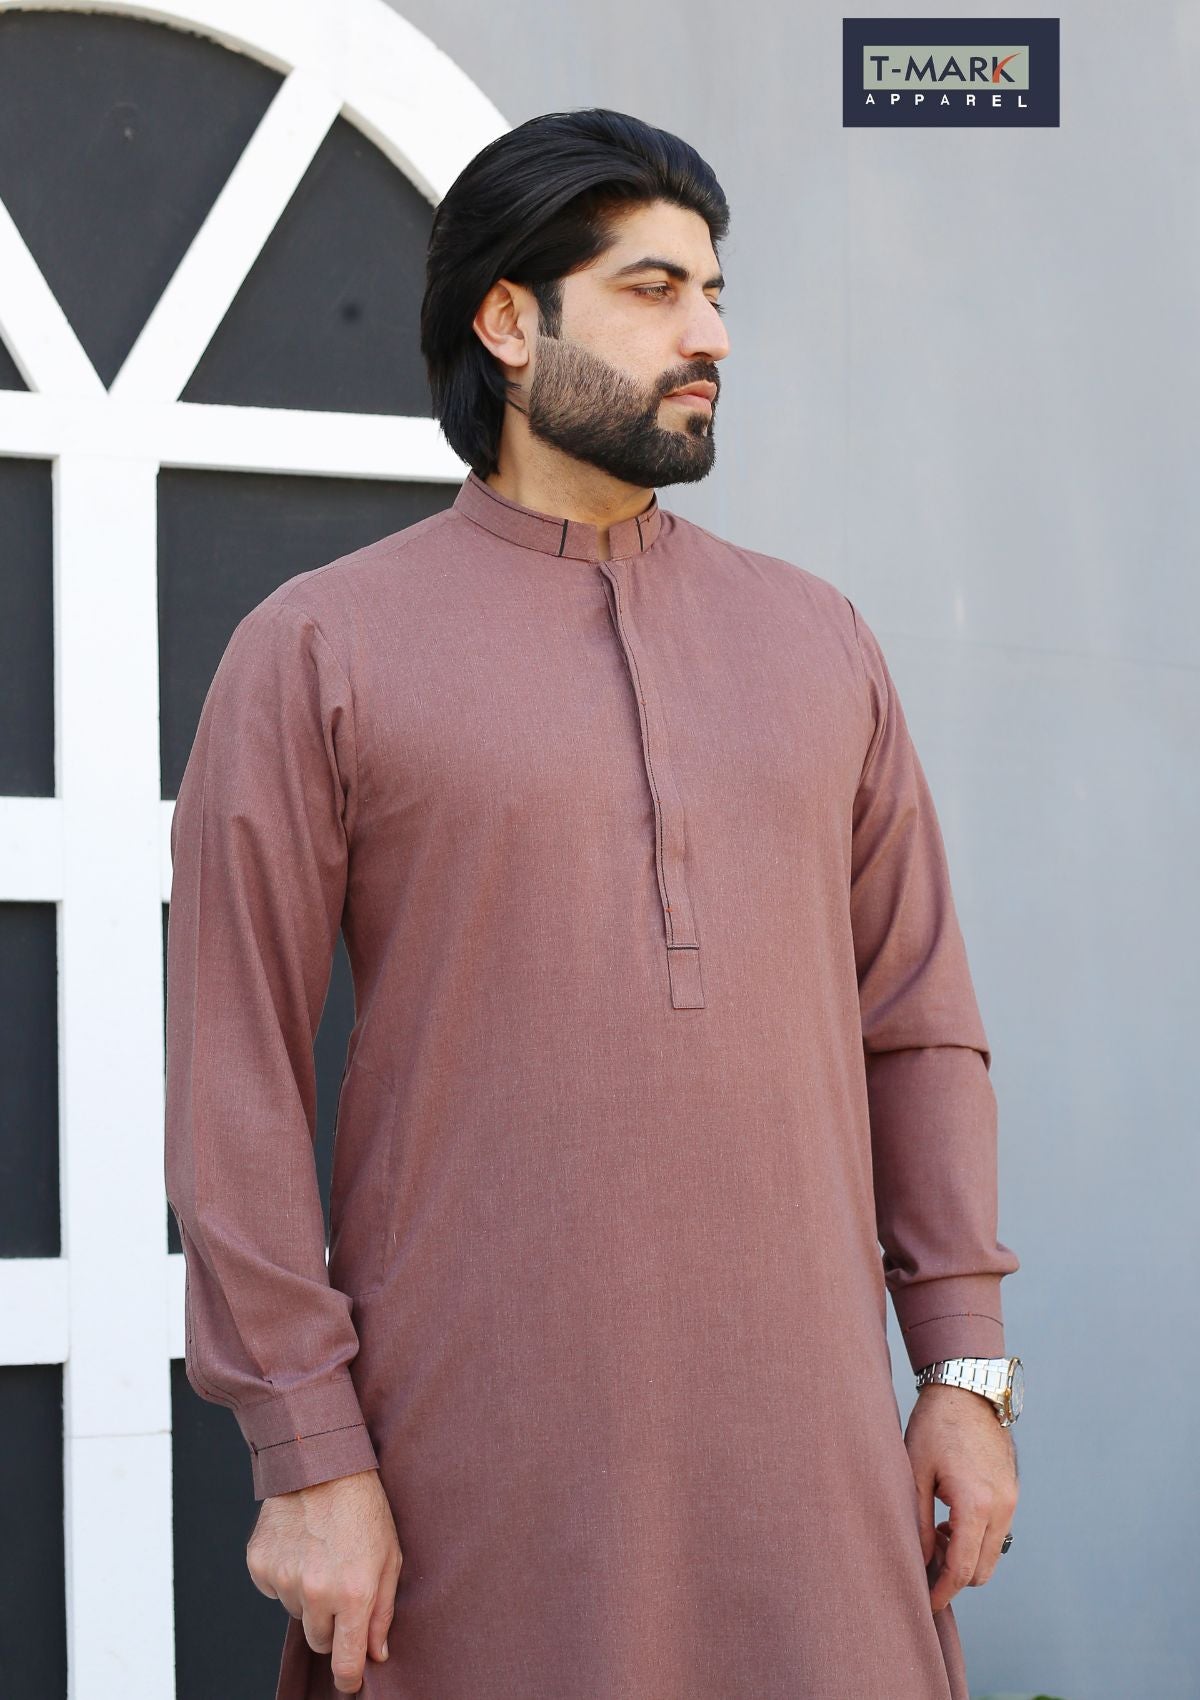 Stitched Collection - T-Mark Apparel - Eid Edit- TP-103